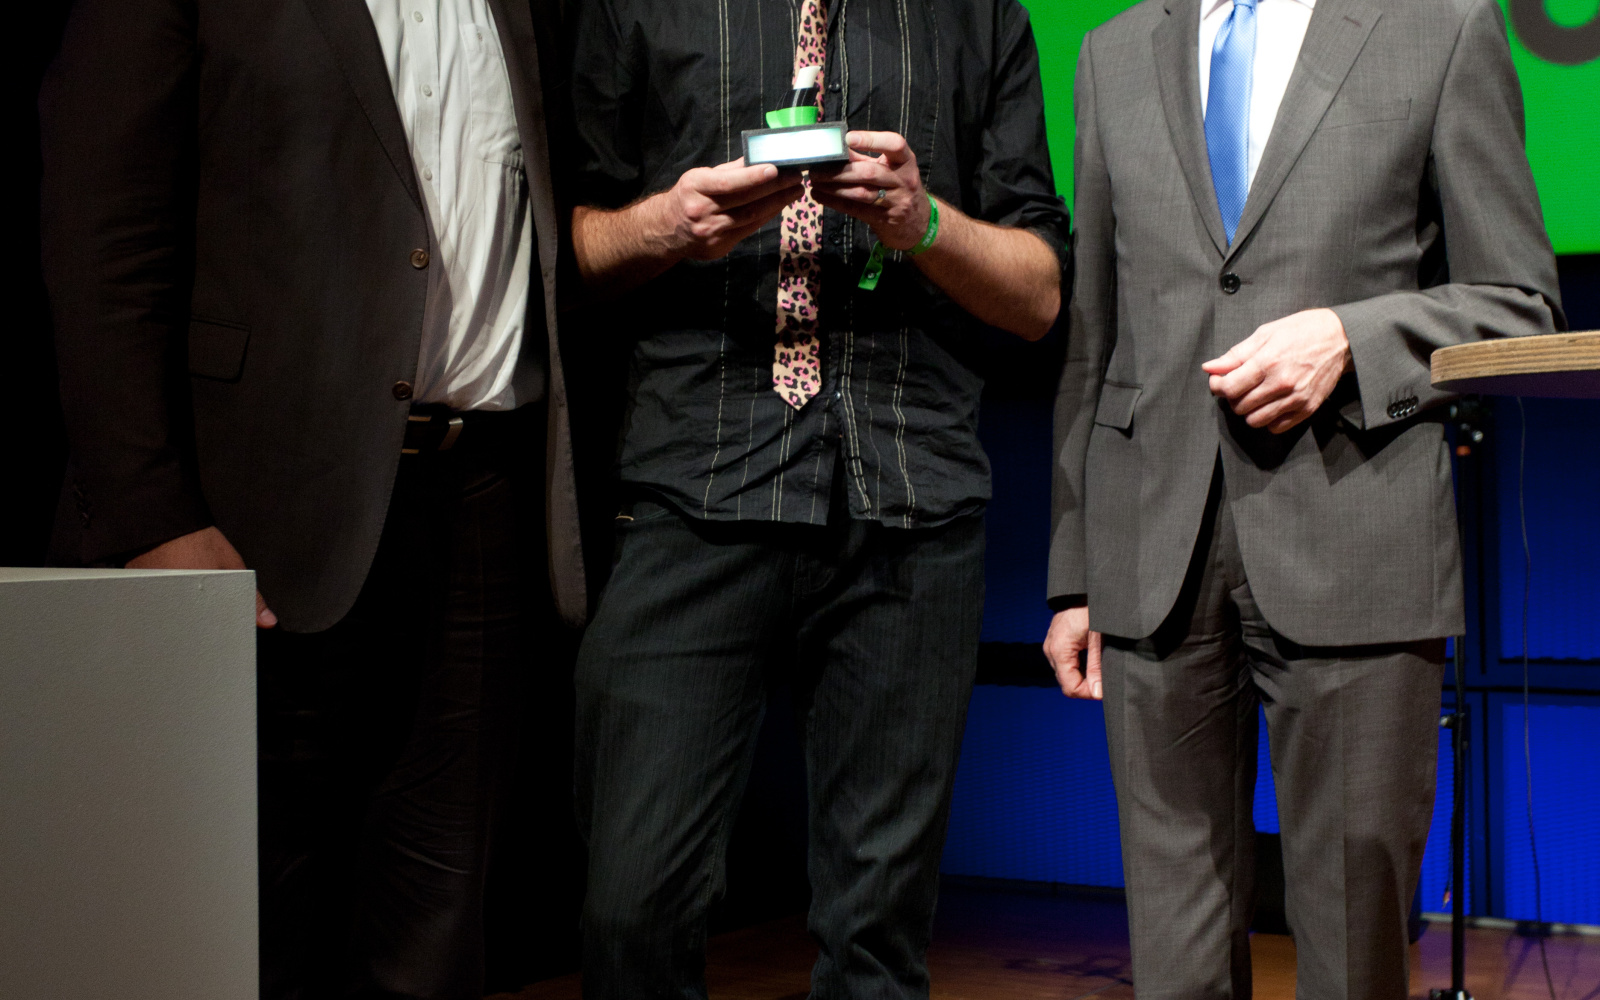 Three man standing next to each other while the one in the middle is holding an award